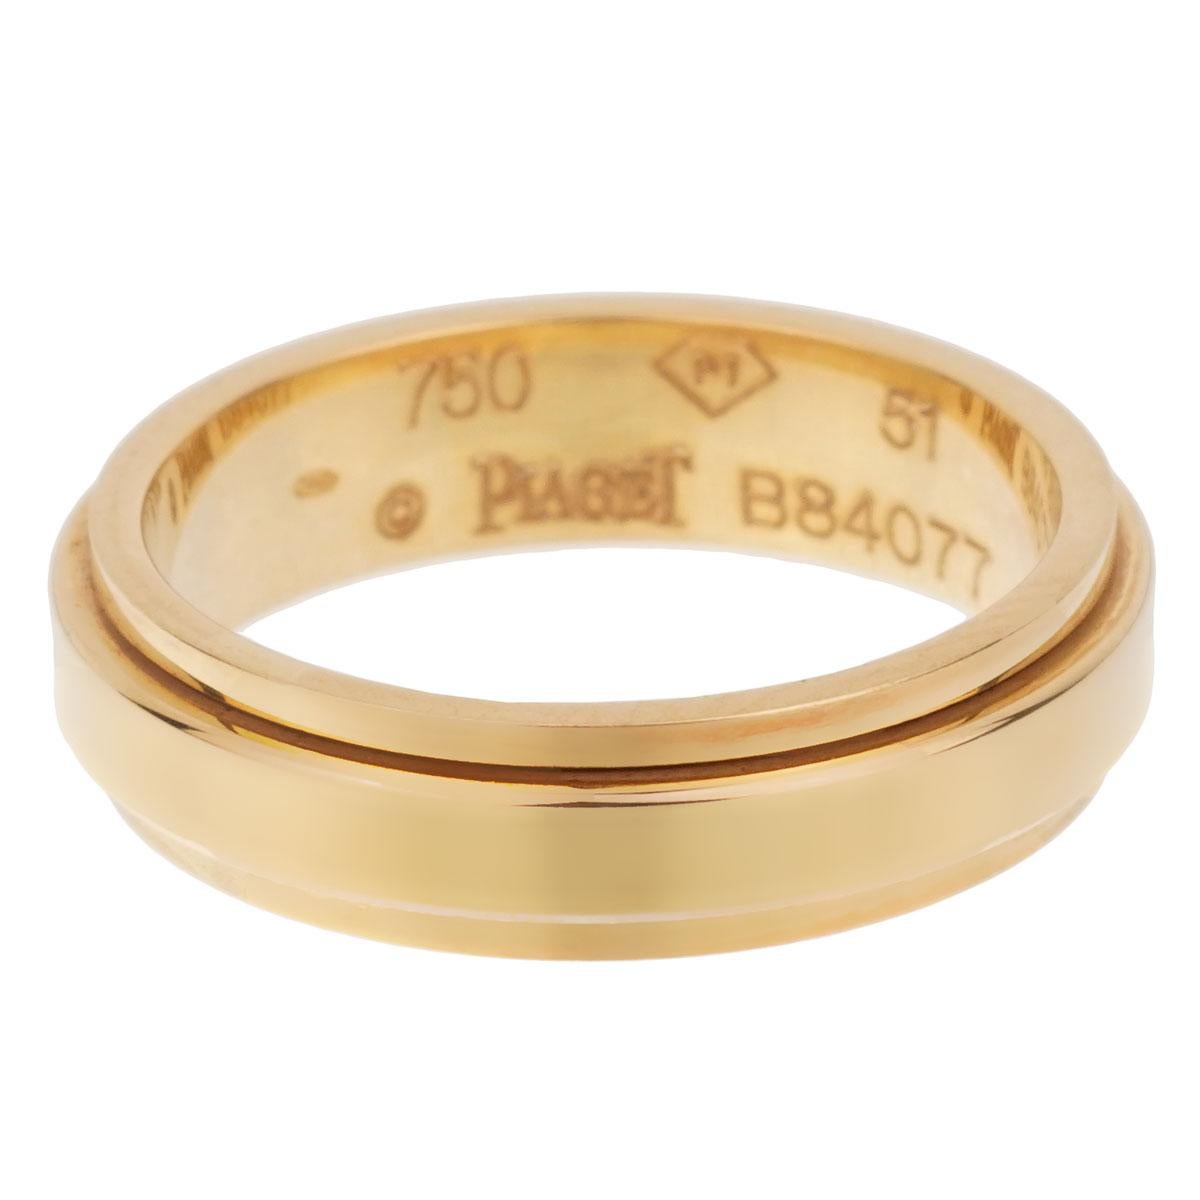 A chic Piaget Possession band ring adorned with a round brilliant cut Piaget diamond in 18k yellow gold. The ring measures a size 5 1/2

Sku: 1919